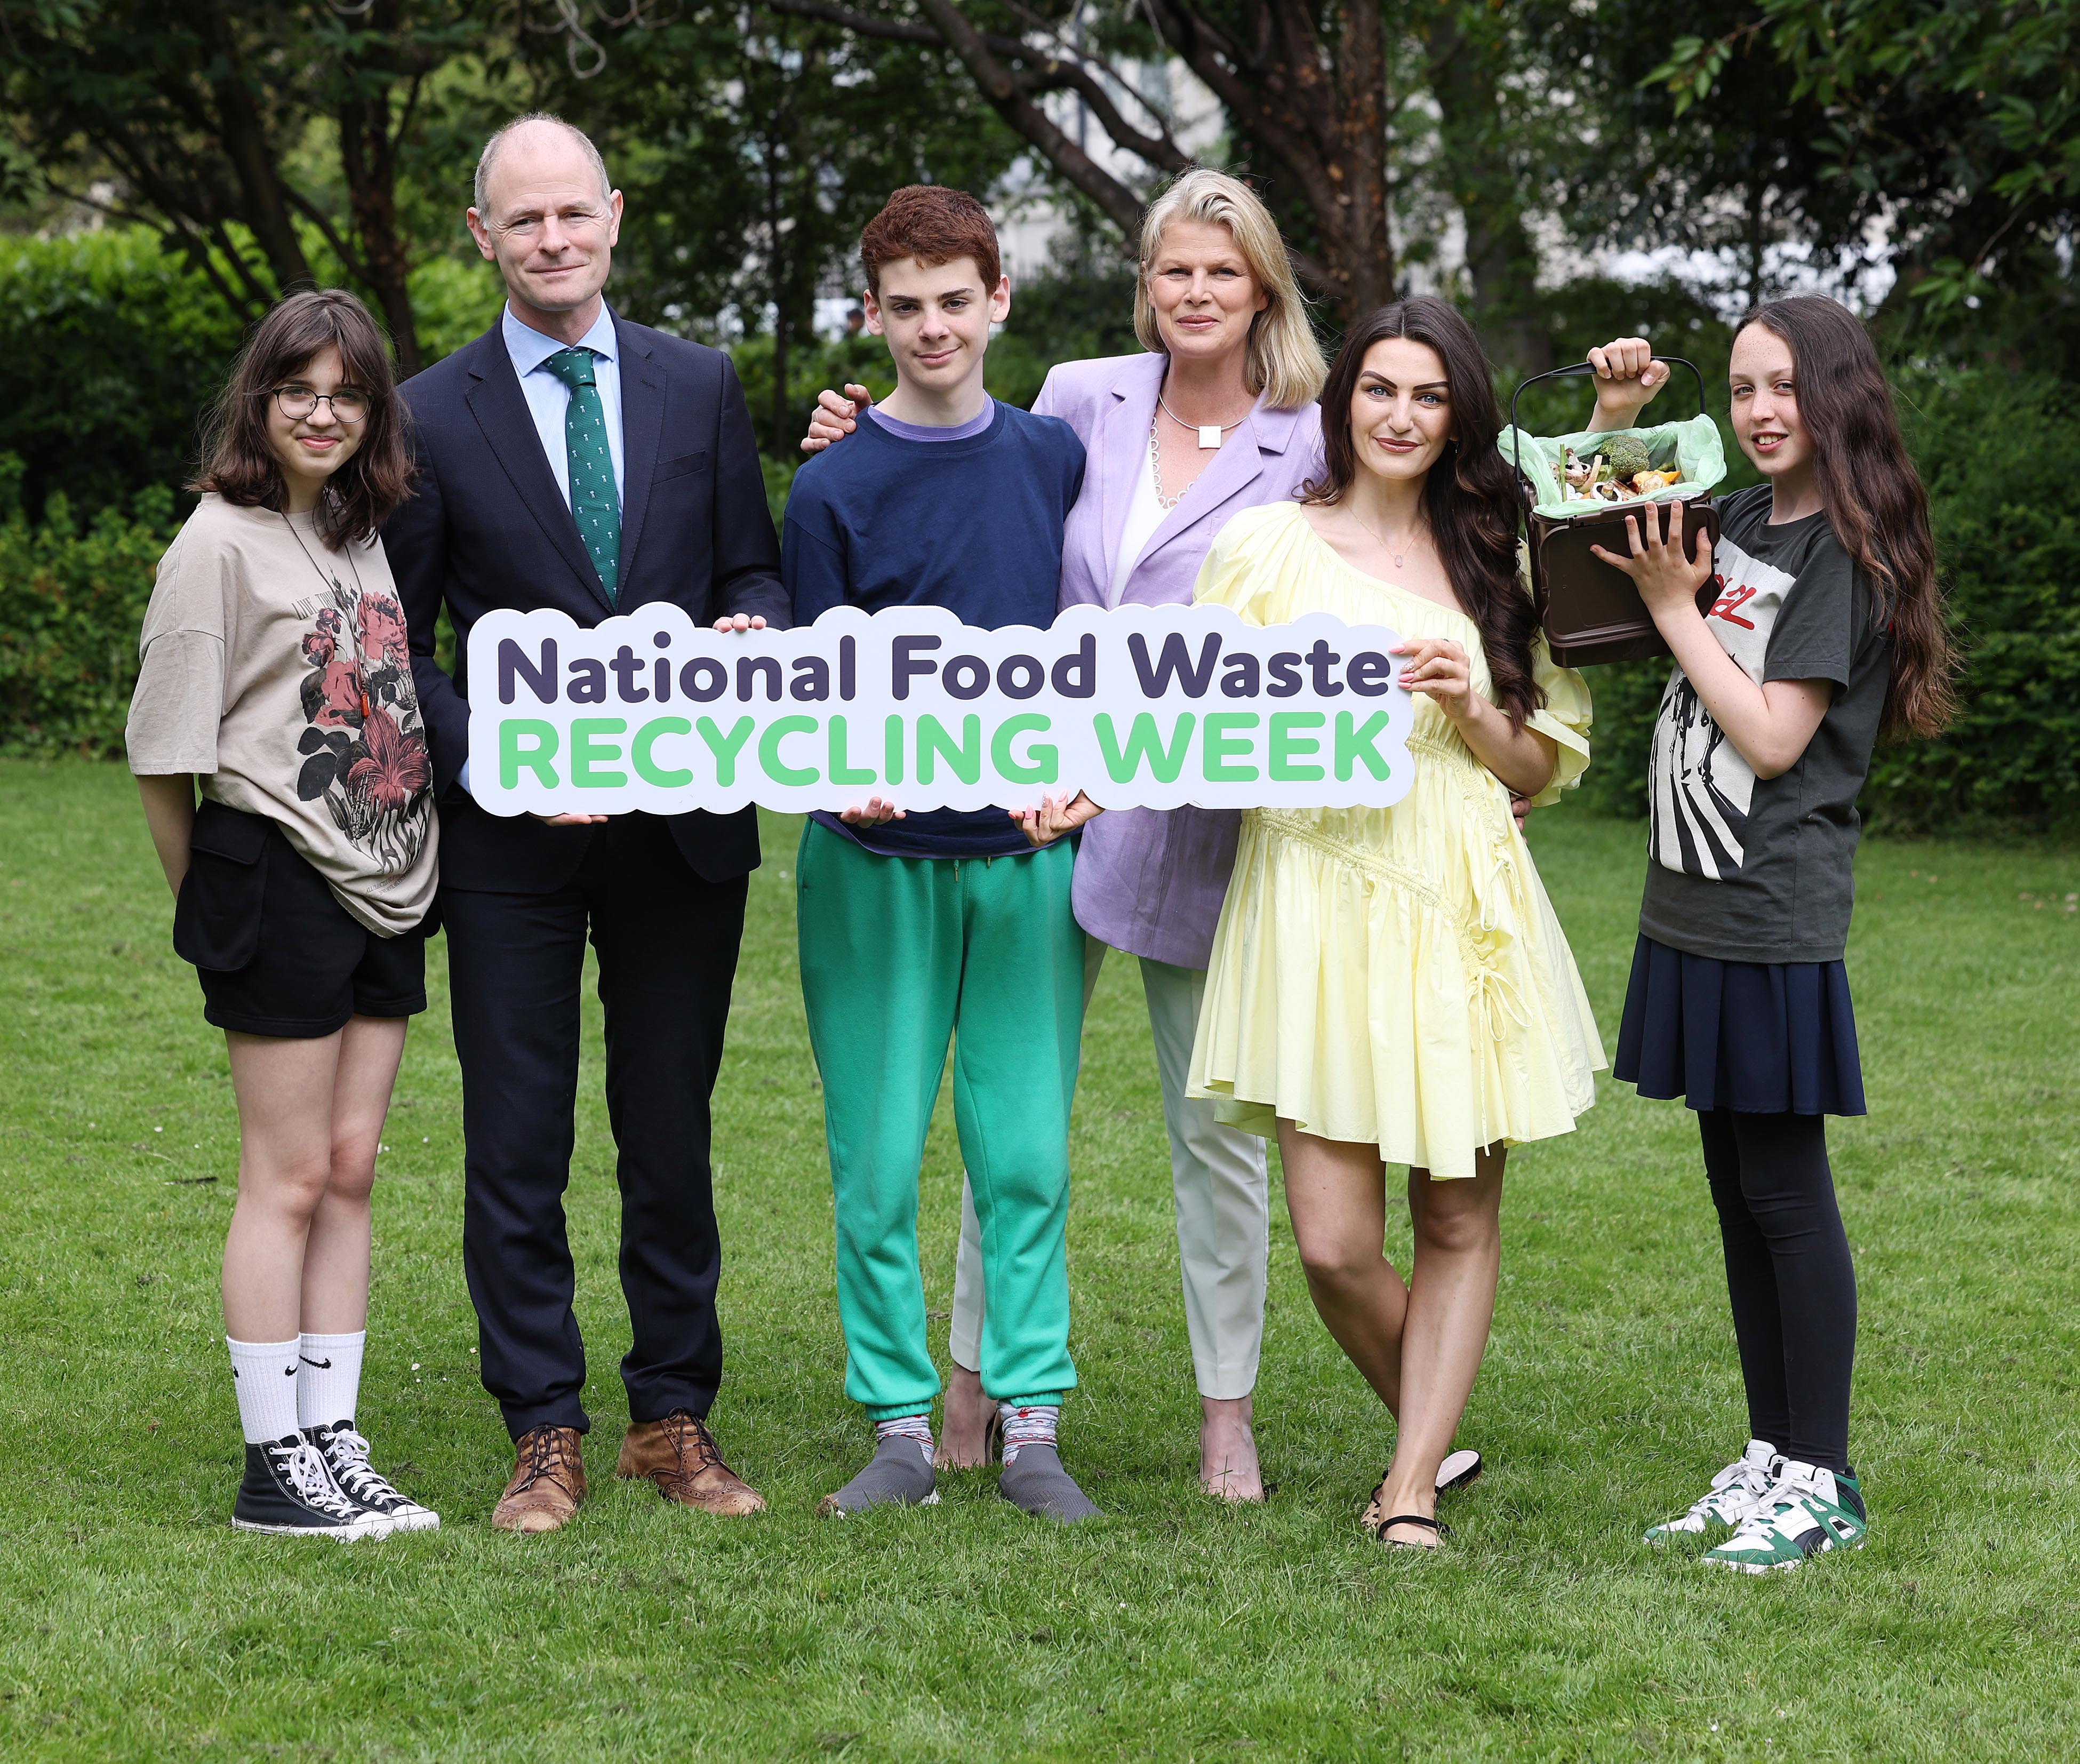 National-Food-Waste-Recycling-Week-Awareness-Campaign-1